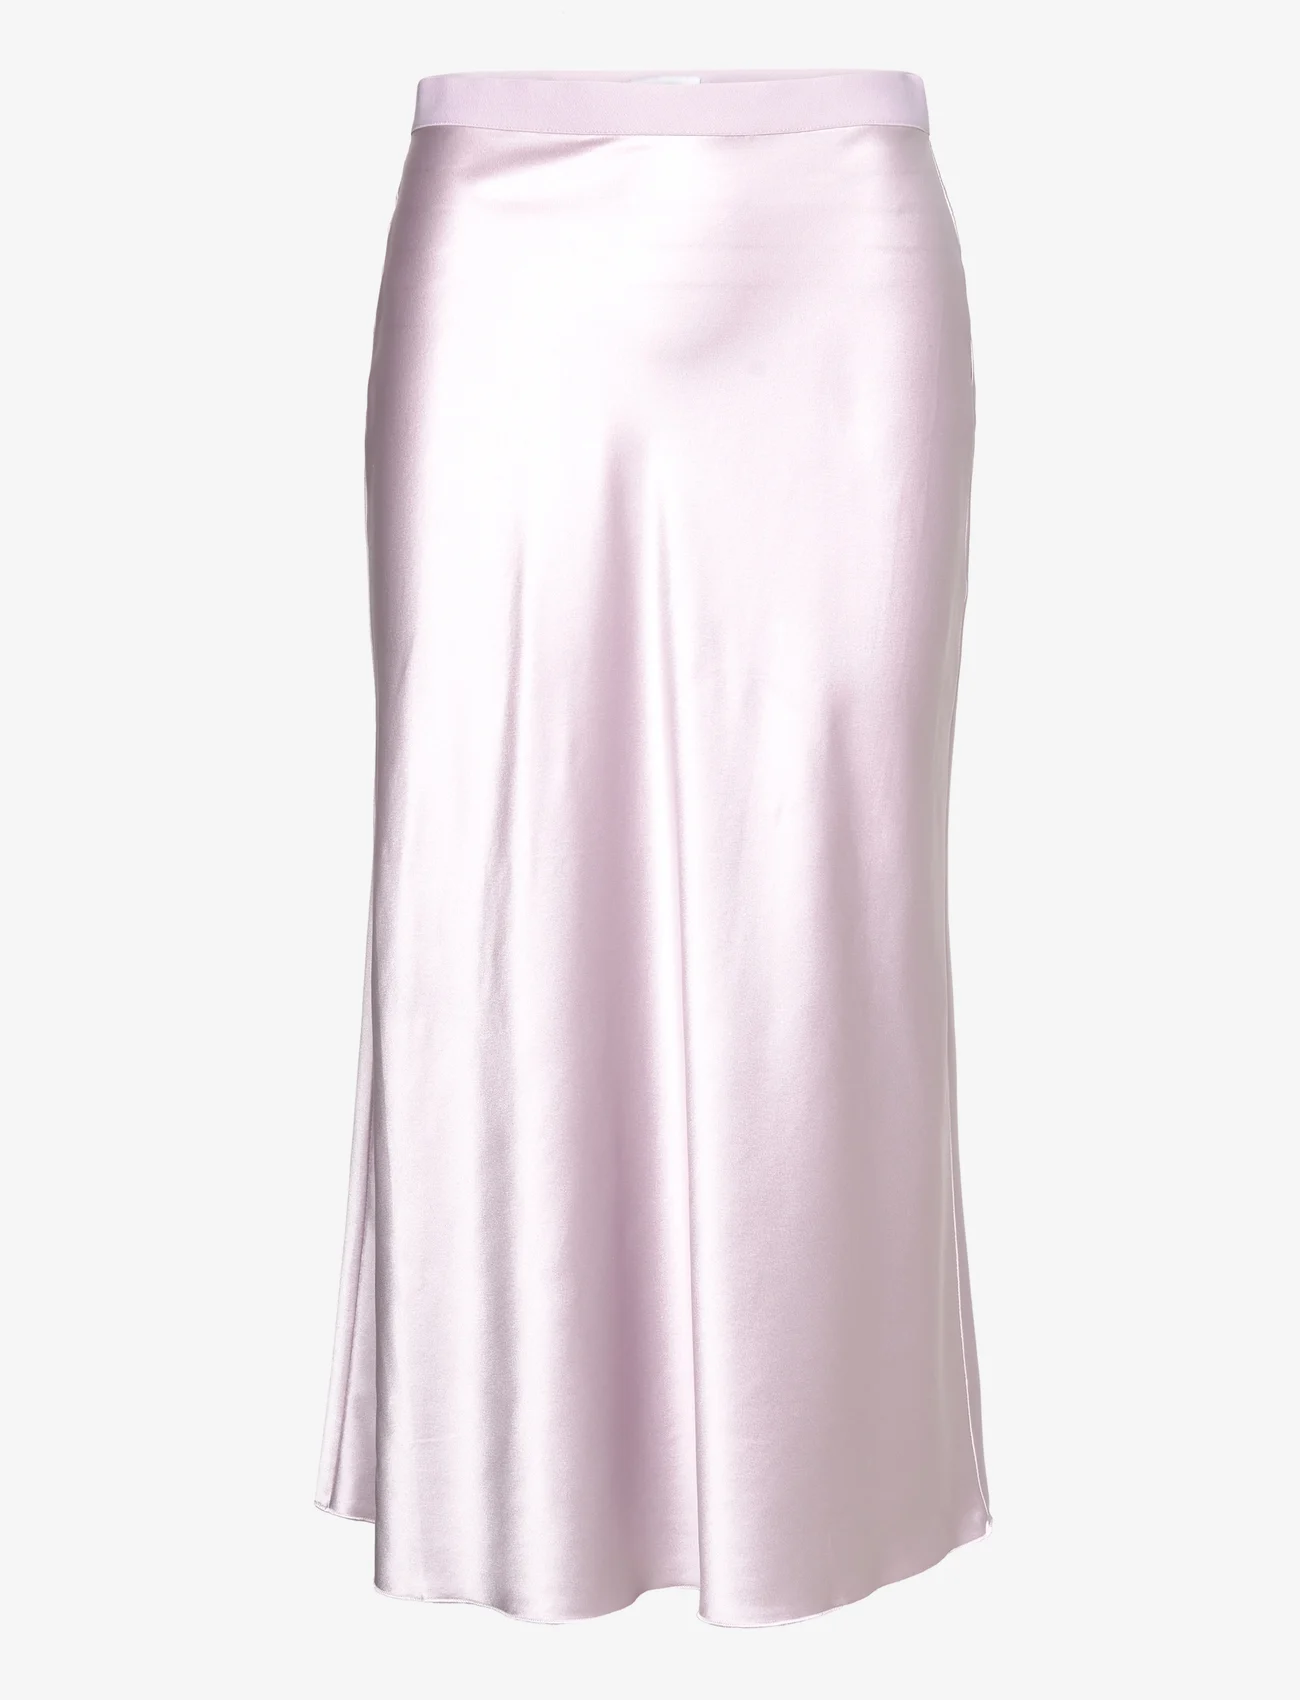 Ahlvar Gallery - Hana satin skirt - party wear at outlet prices - lavender - 0